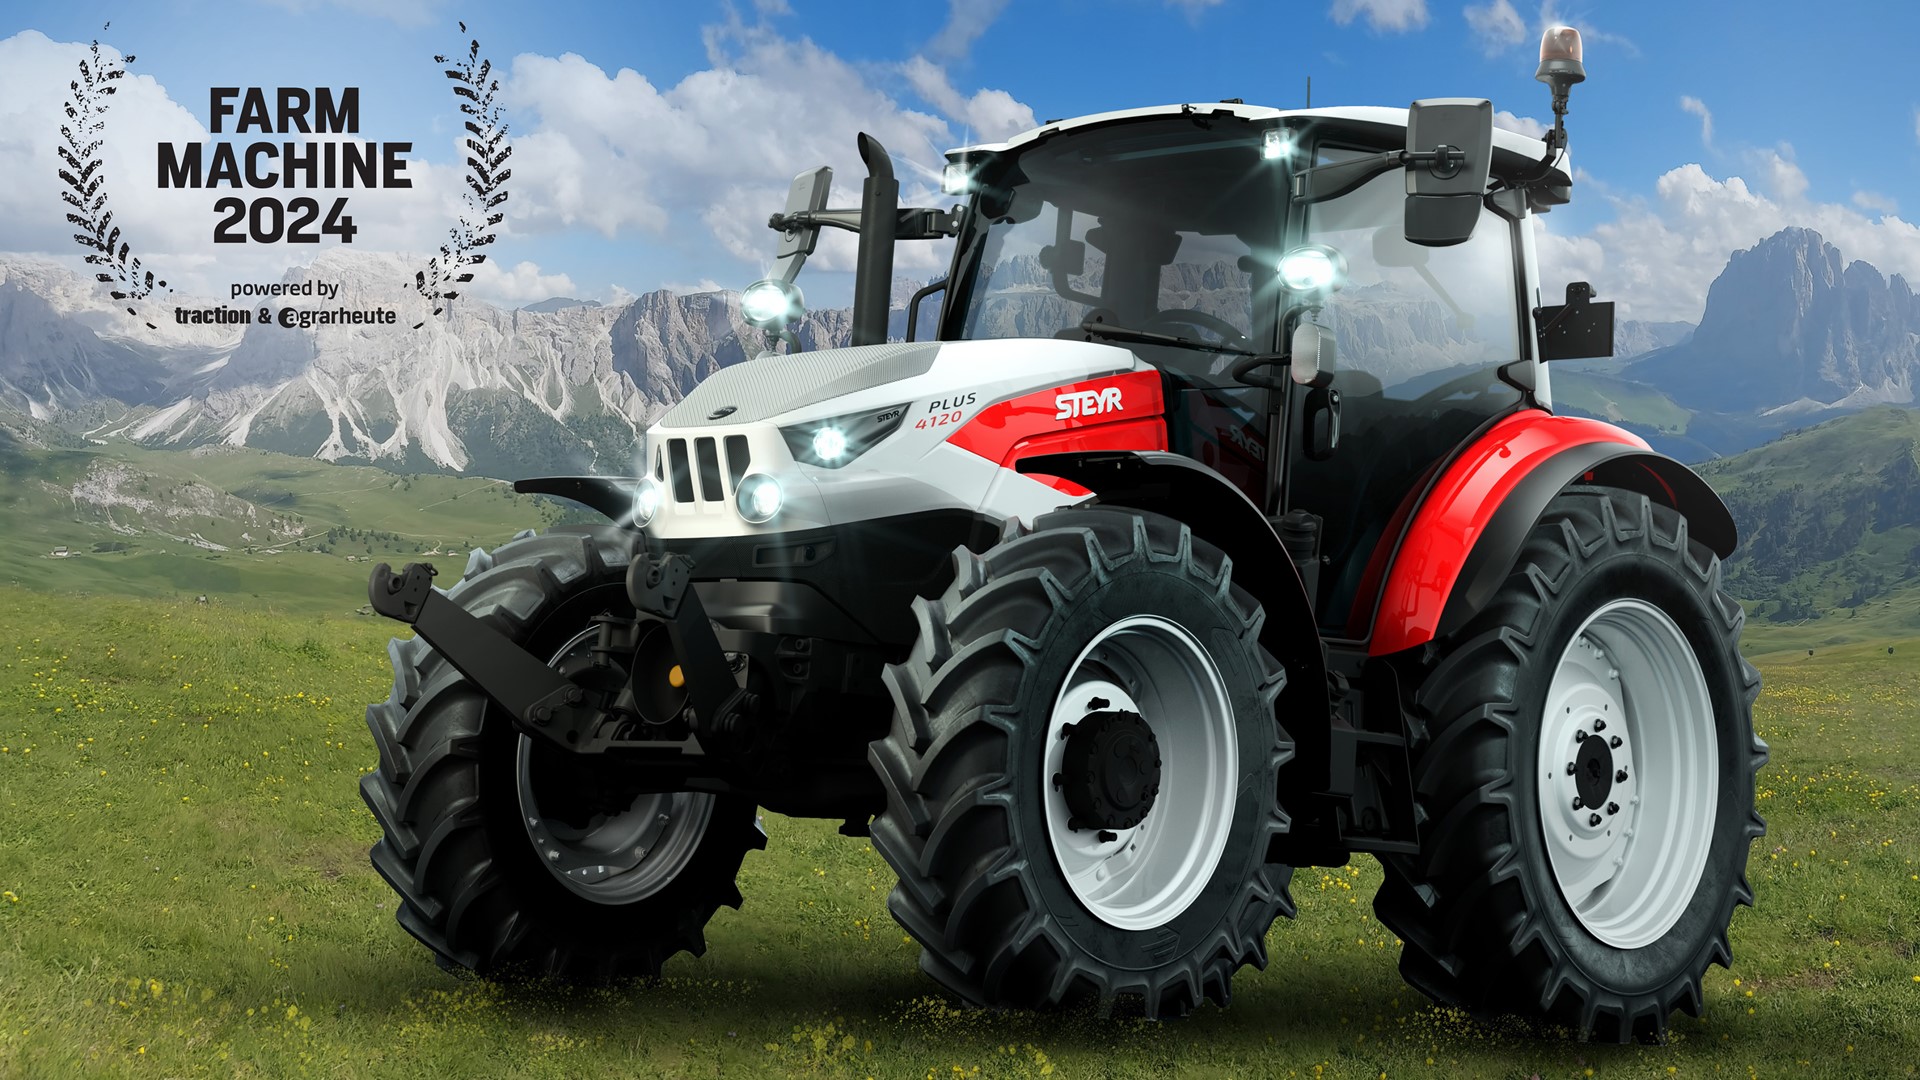 NEW STEYR® PLUS TRACTORS NOMINATED FOR FARM MACHINE 2024